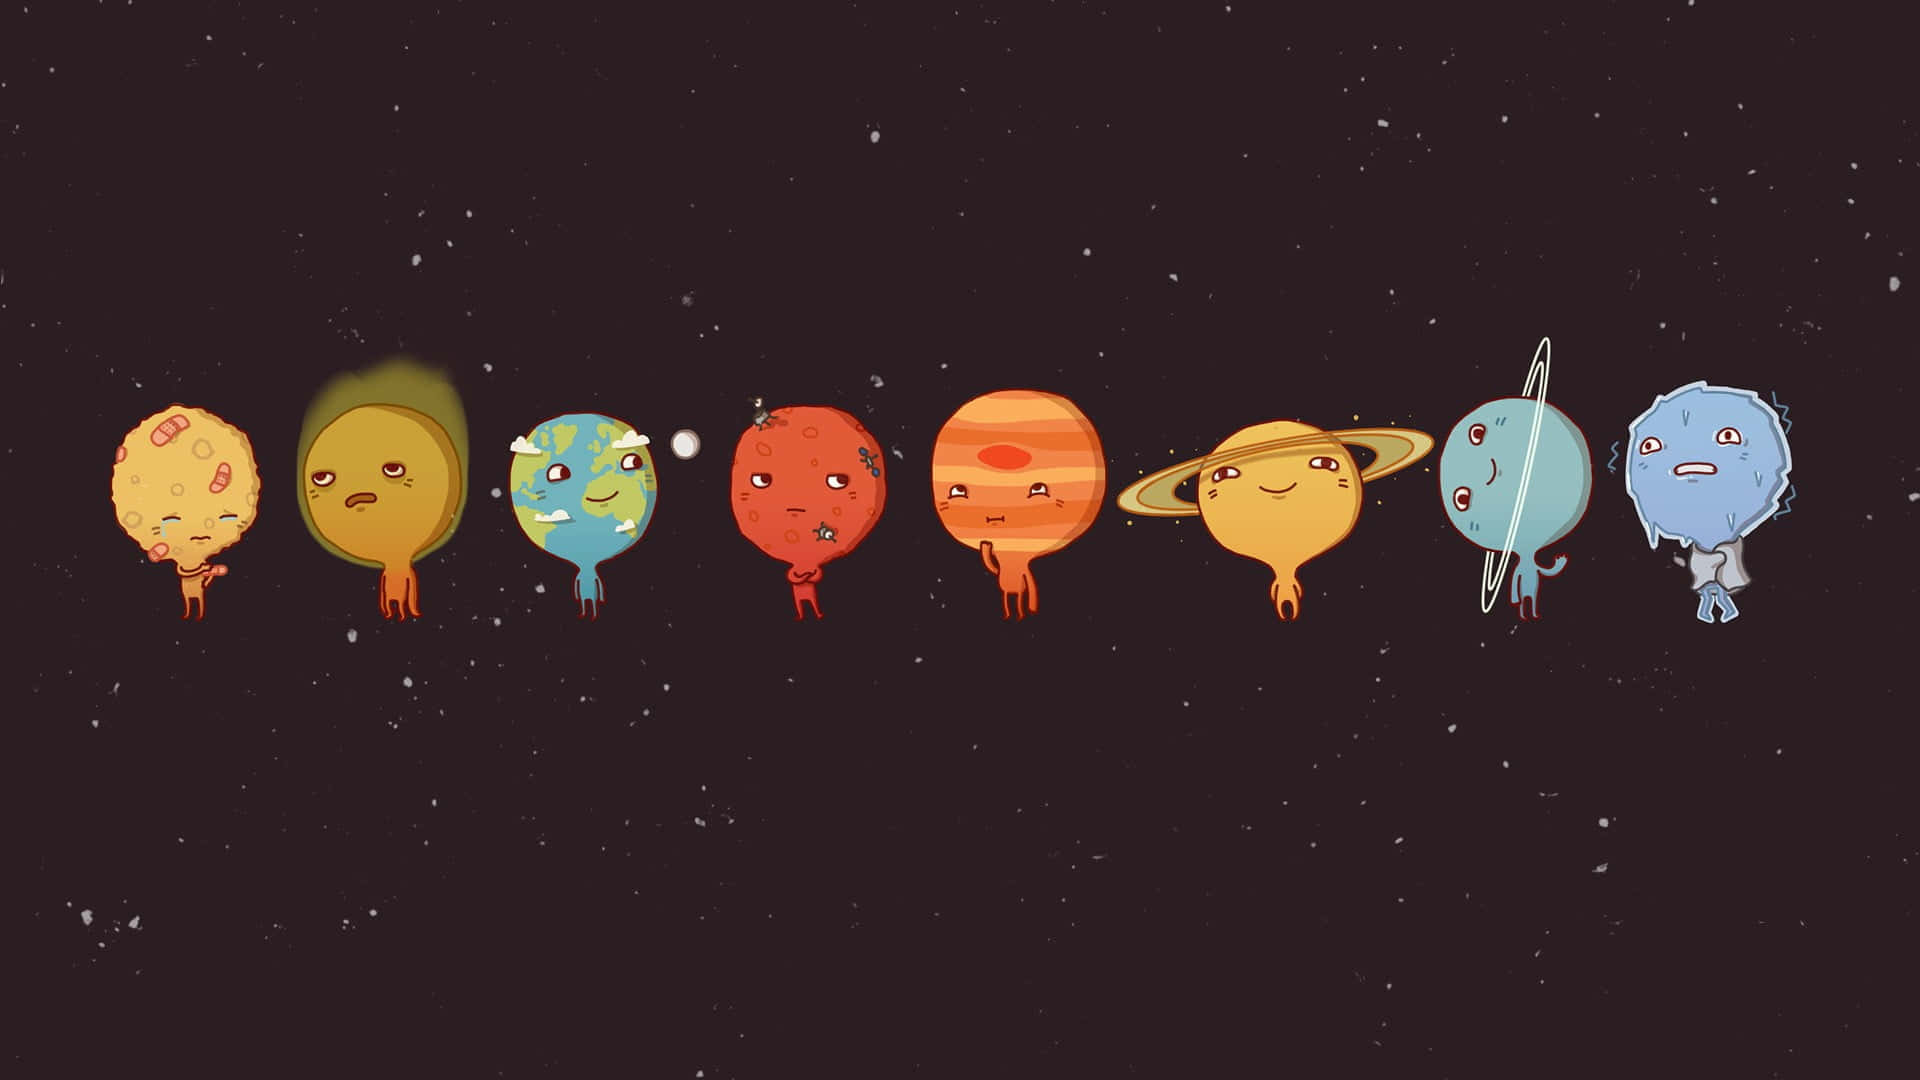 Explore the farthest reaches of the universe with Cartoon Space!